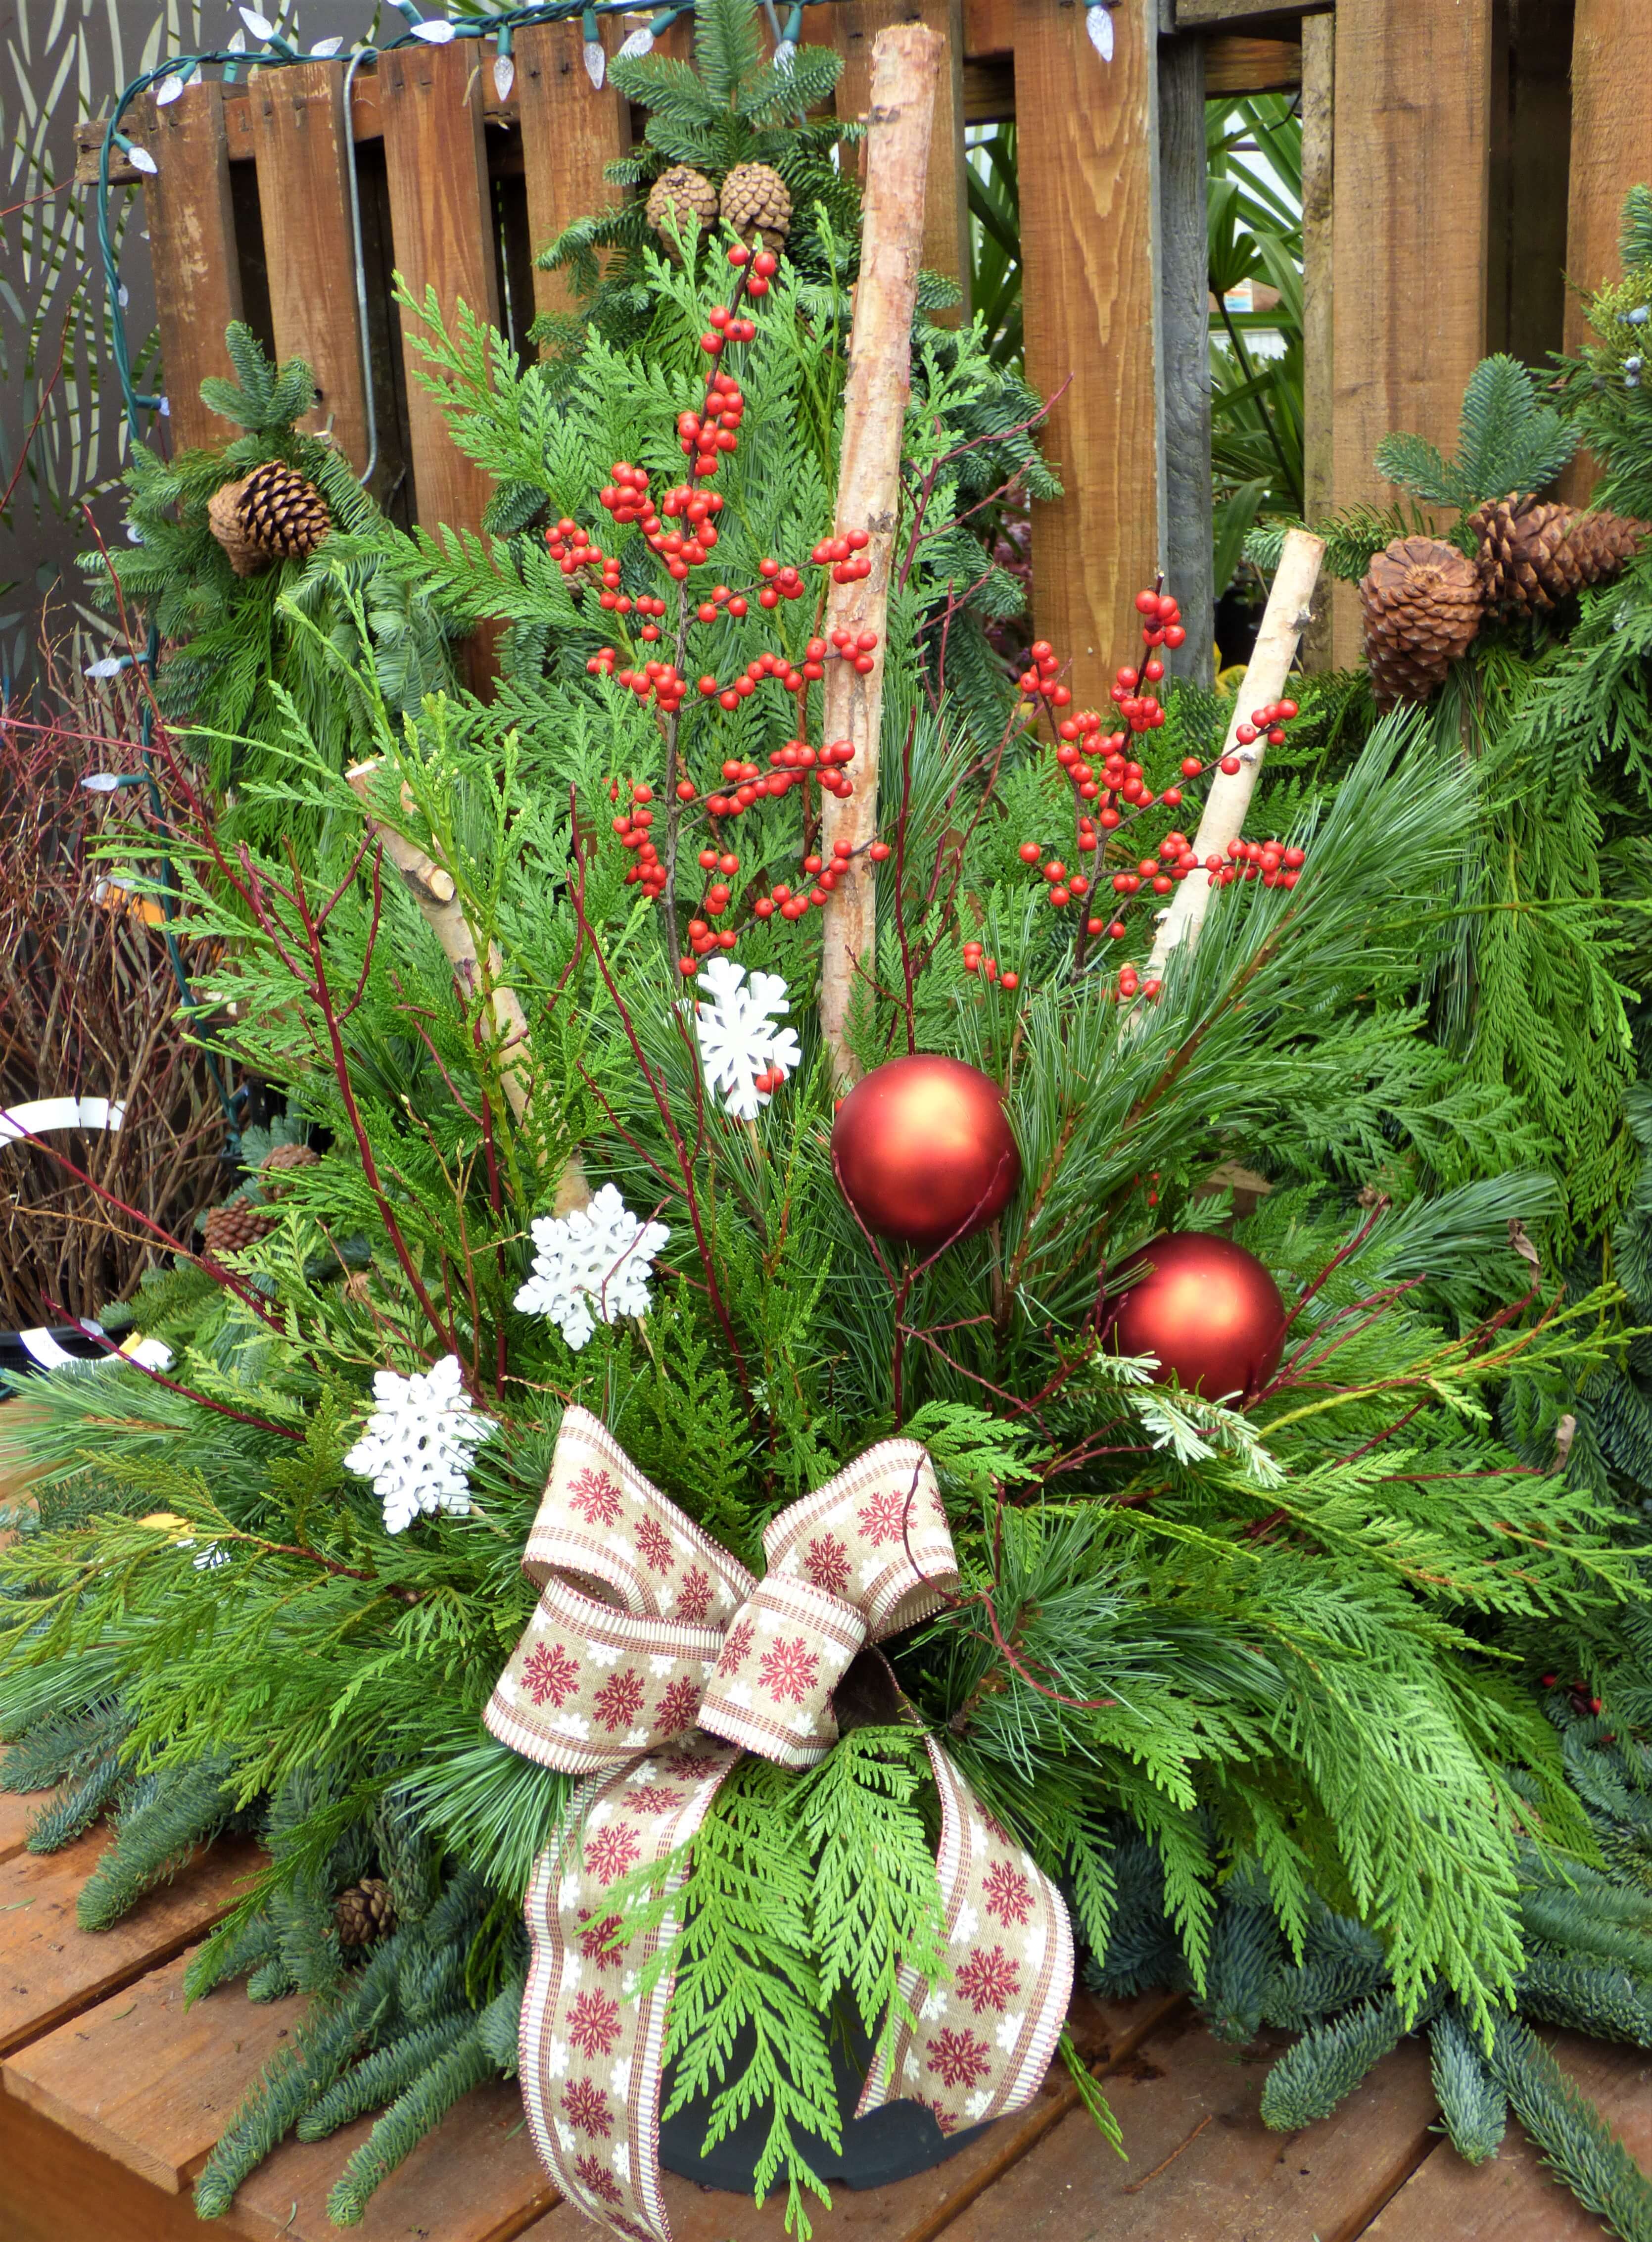 Decorated porch pot with red bulbs